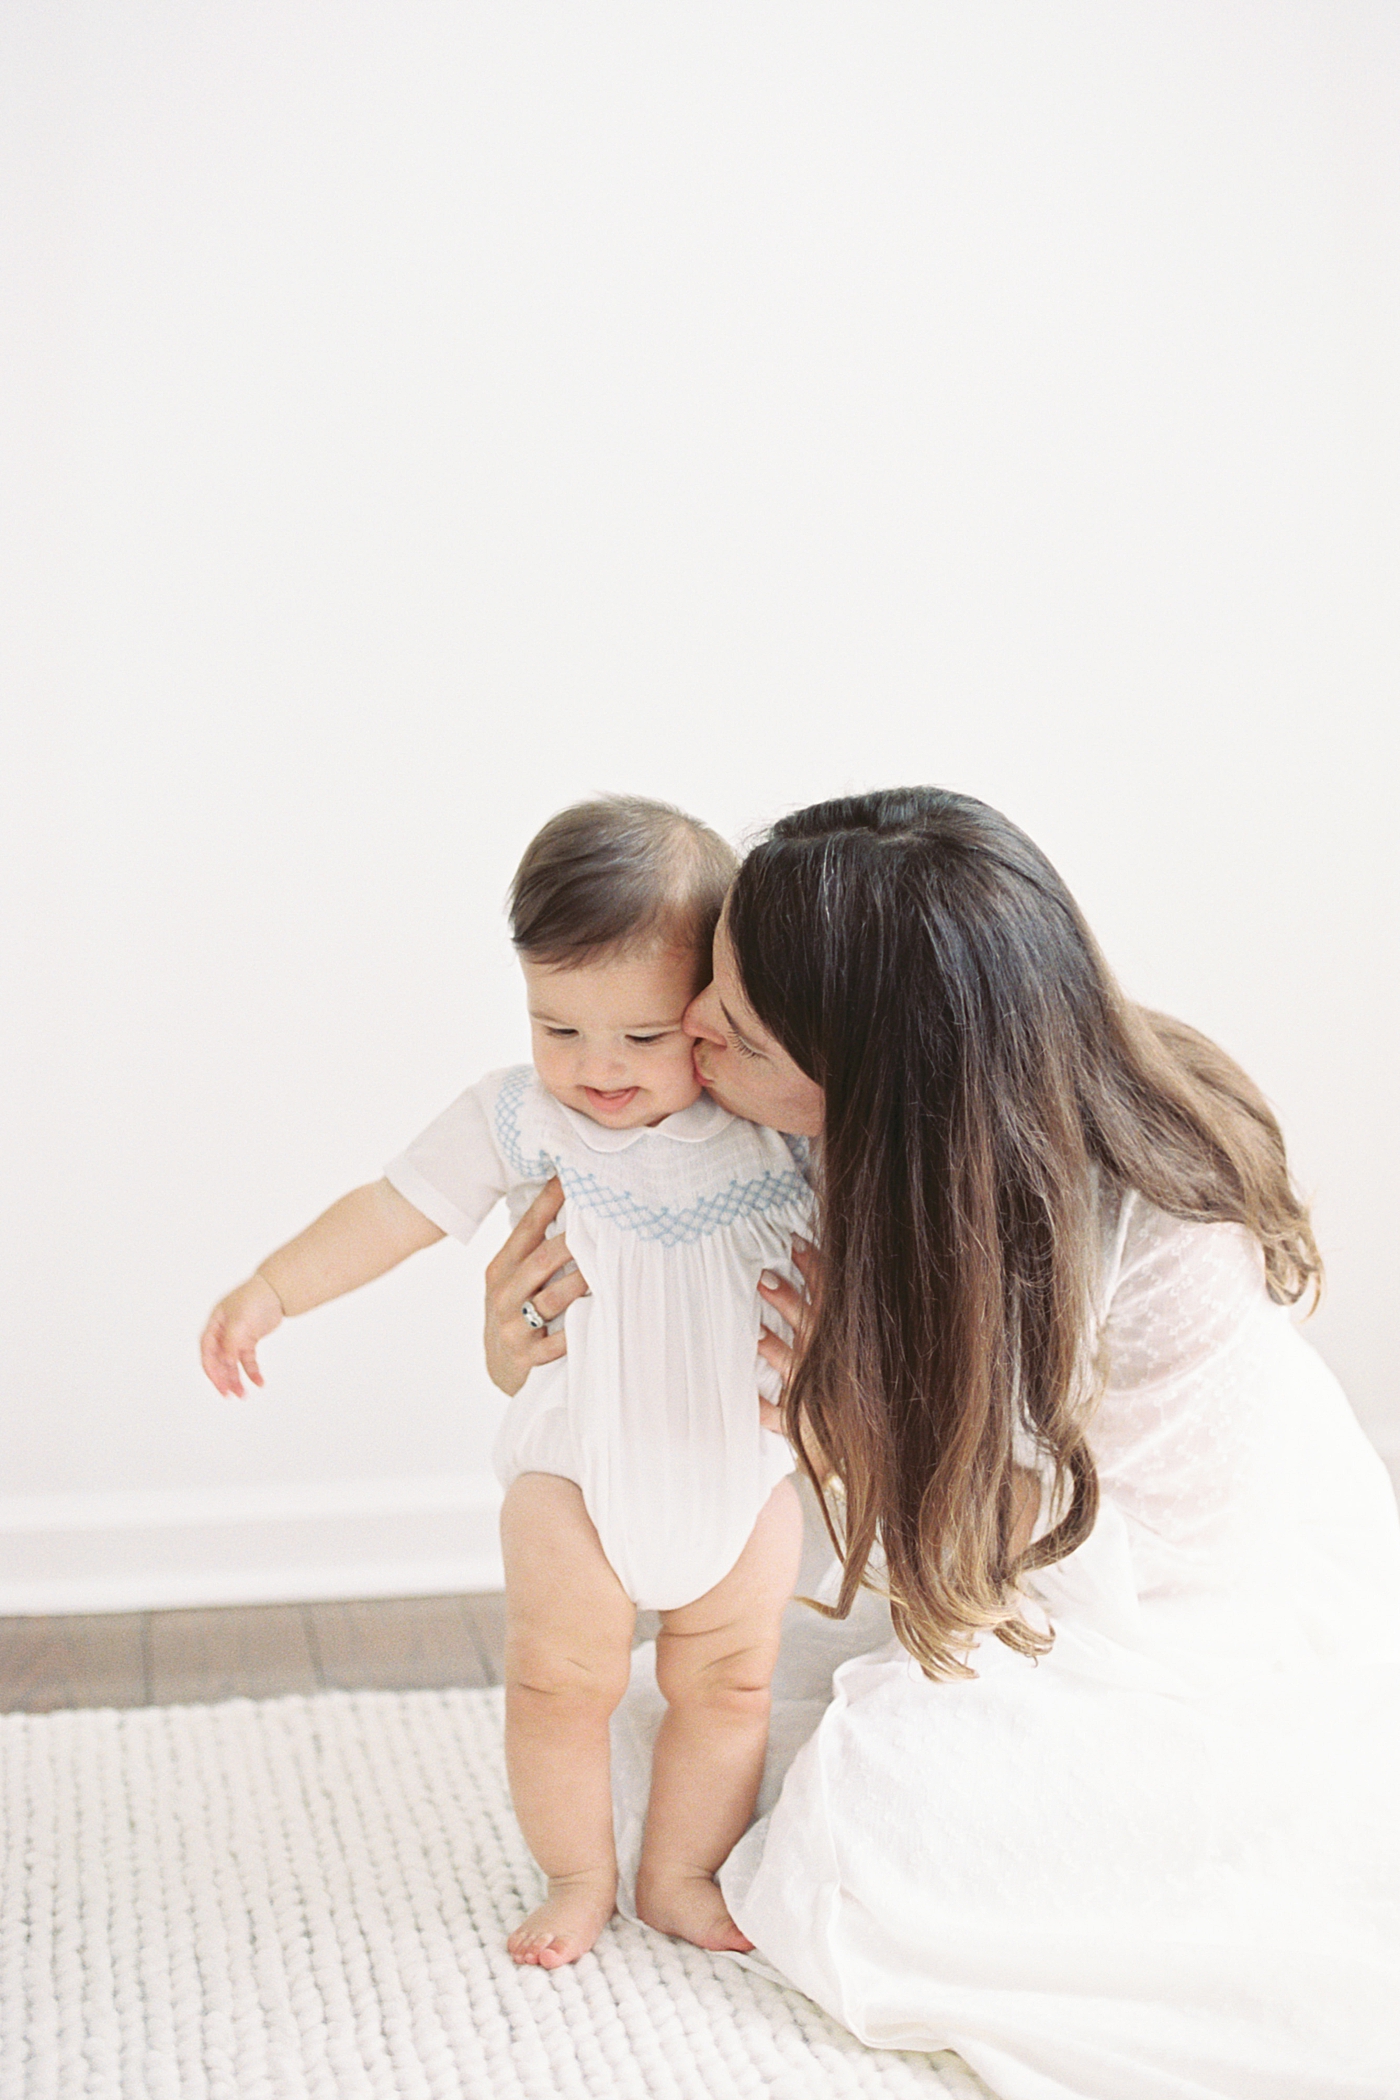 Mother kneeling, kissing and holding baby on a white room and white rug | Images by Caitlyn Motycka